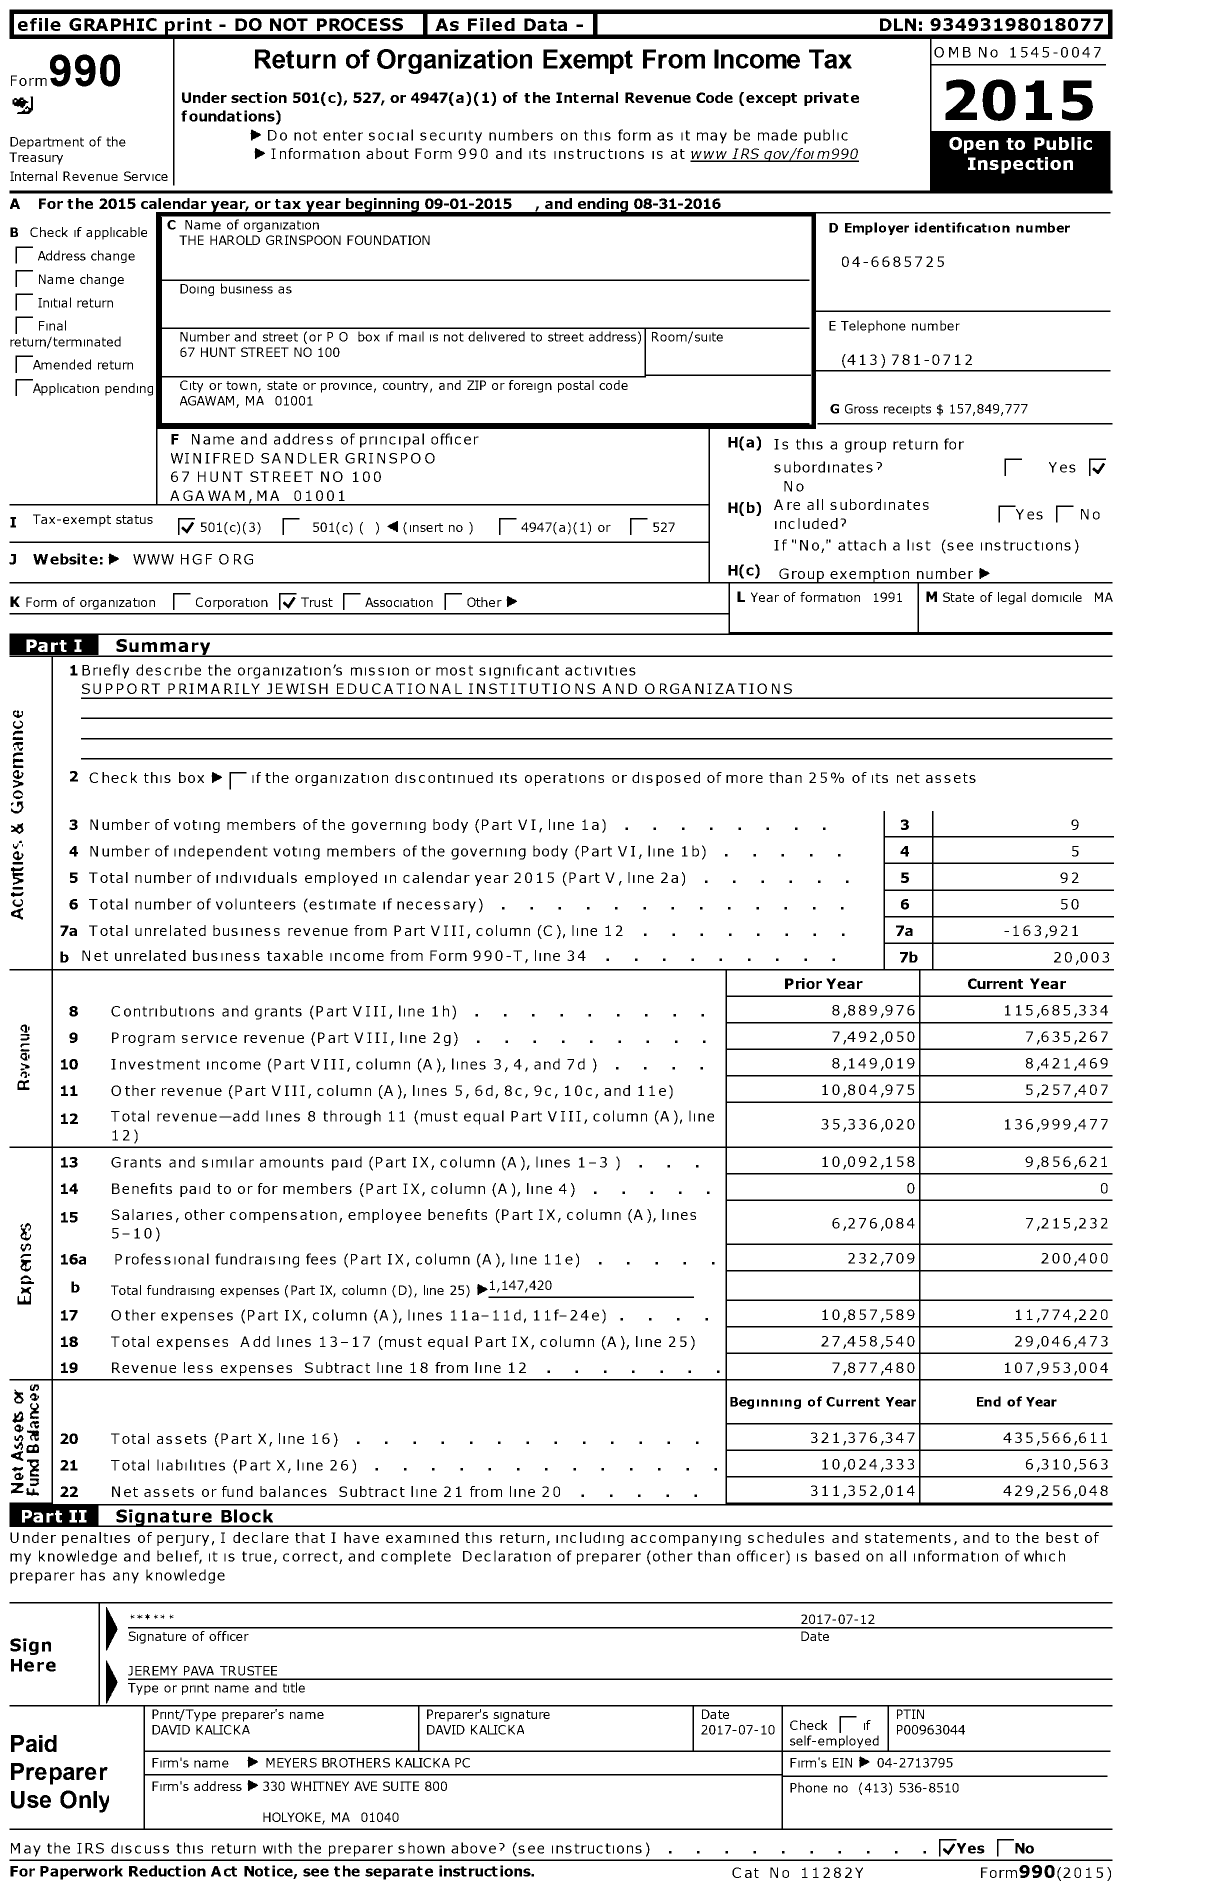 Image of first page of 2015 Form 990 for Harold Grinspoon Foundation (HGF)